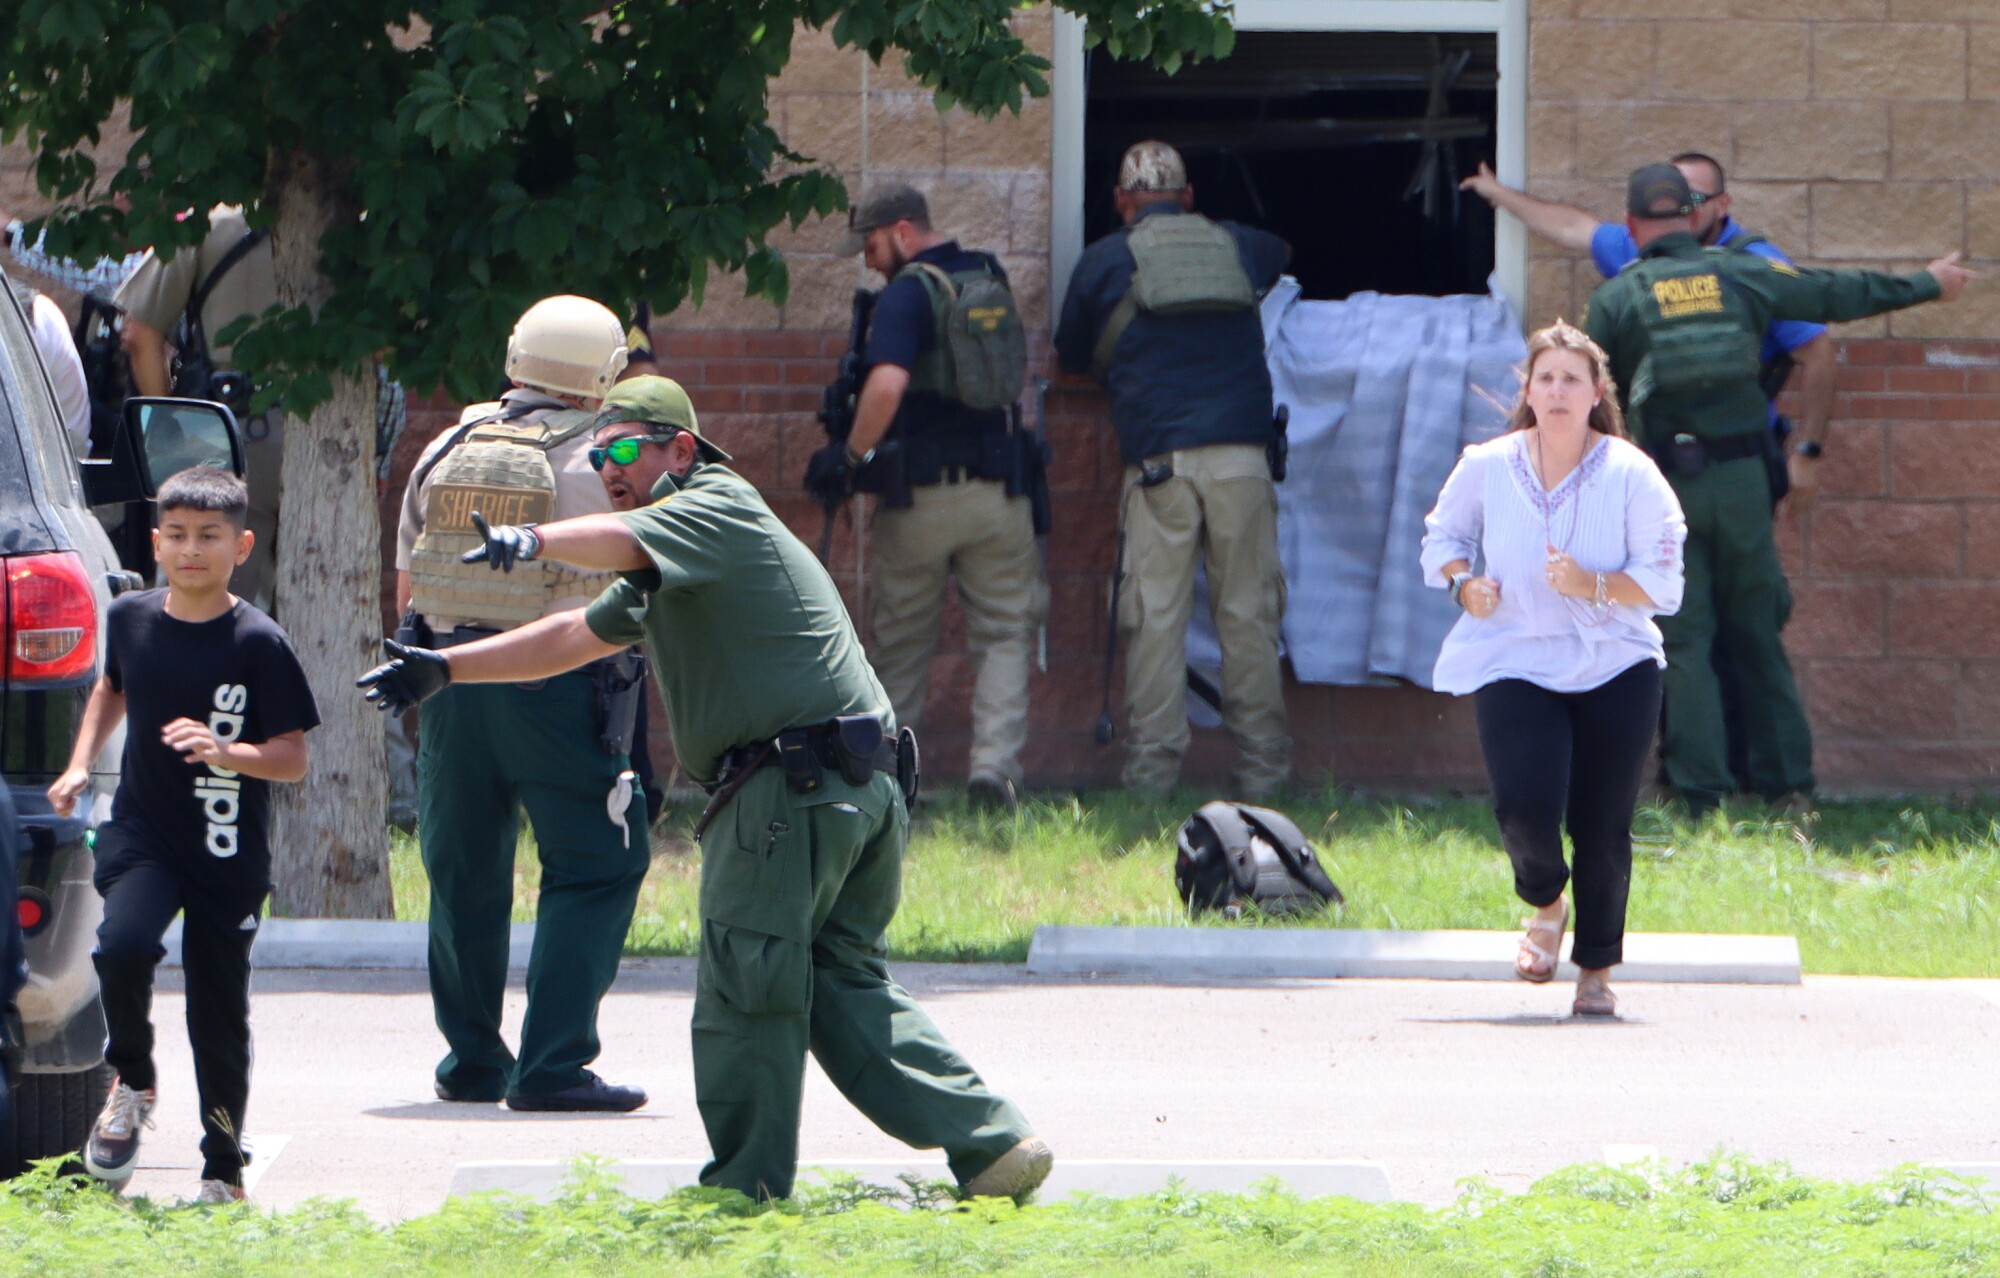 Emergency personnel direct children away from Robb Elementary School on the day of the shooting in Uvalde, Texas.